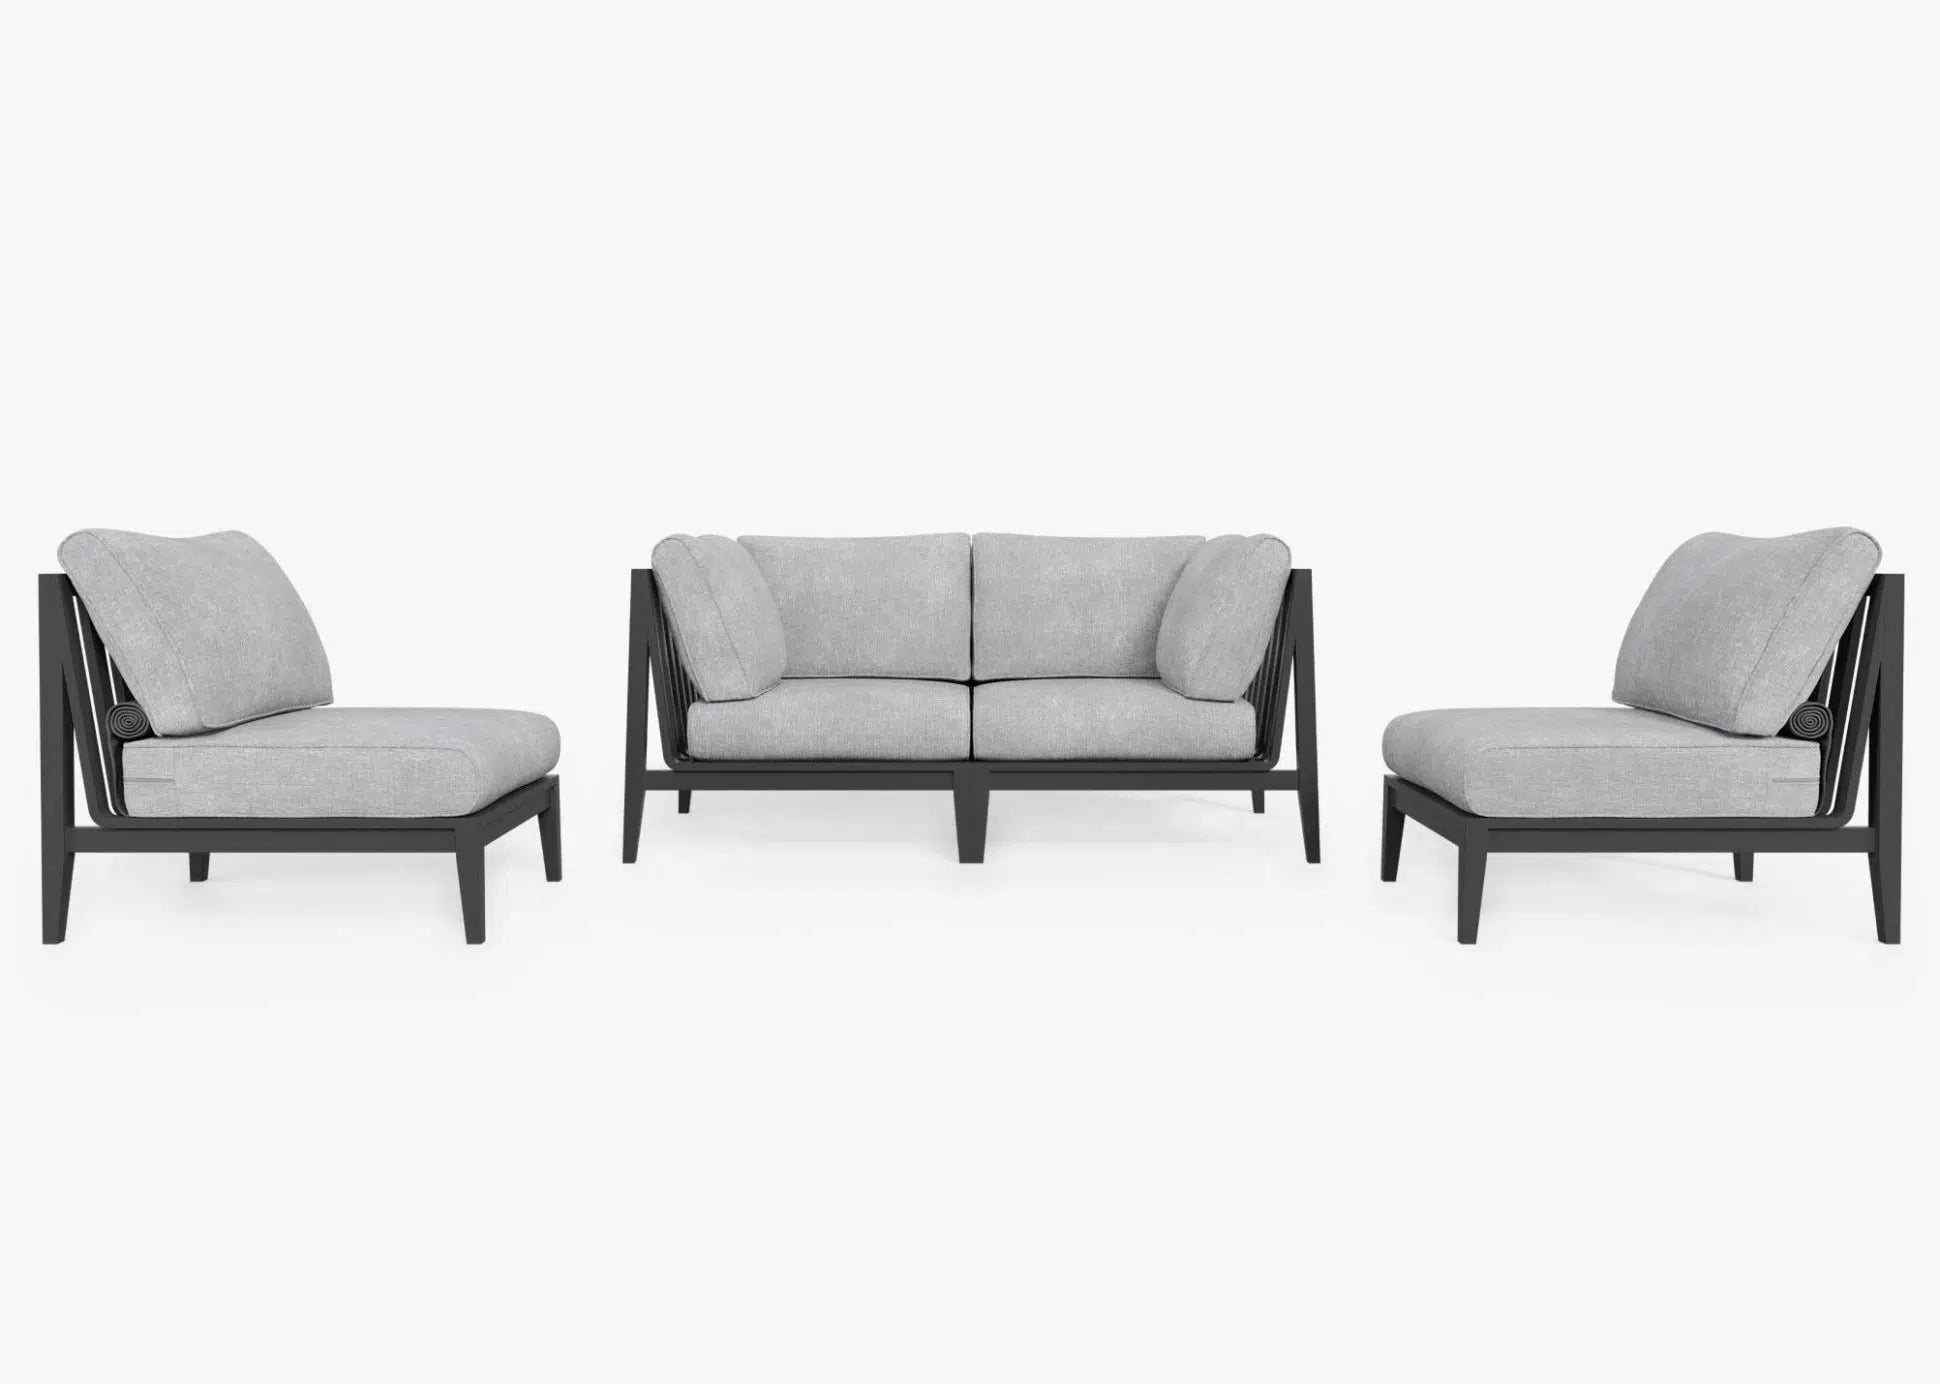 Live Outer 69" Charcoal Aluminum Outdoor Loveseat With Armless Chairs and Pacific Fog Gray Cushion (4-Seat)